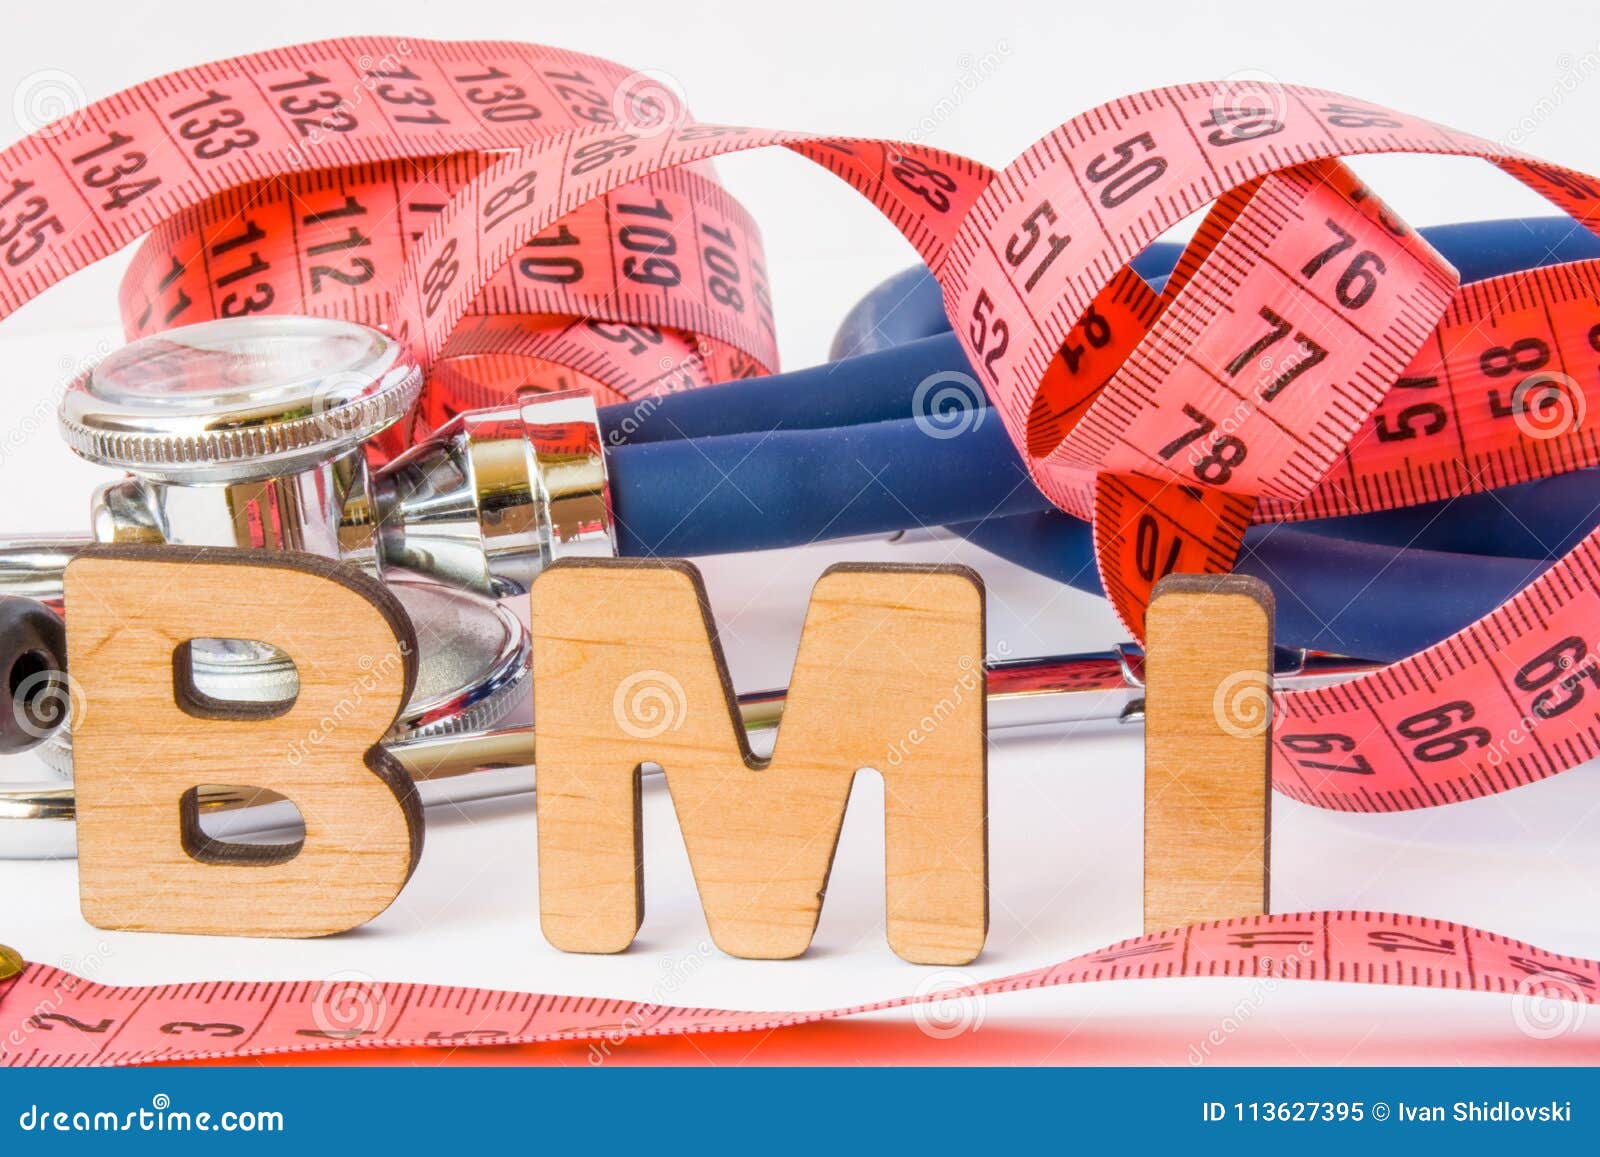 bmi or body mass index abbreviation or acronym photo concept in medical diagnostics or nutrition, diet. word bmi is on background